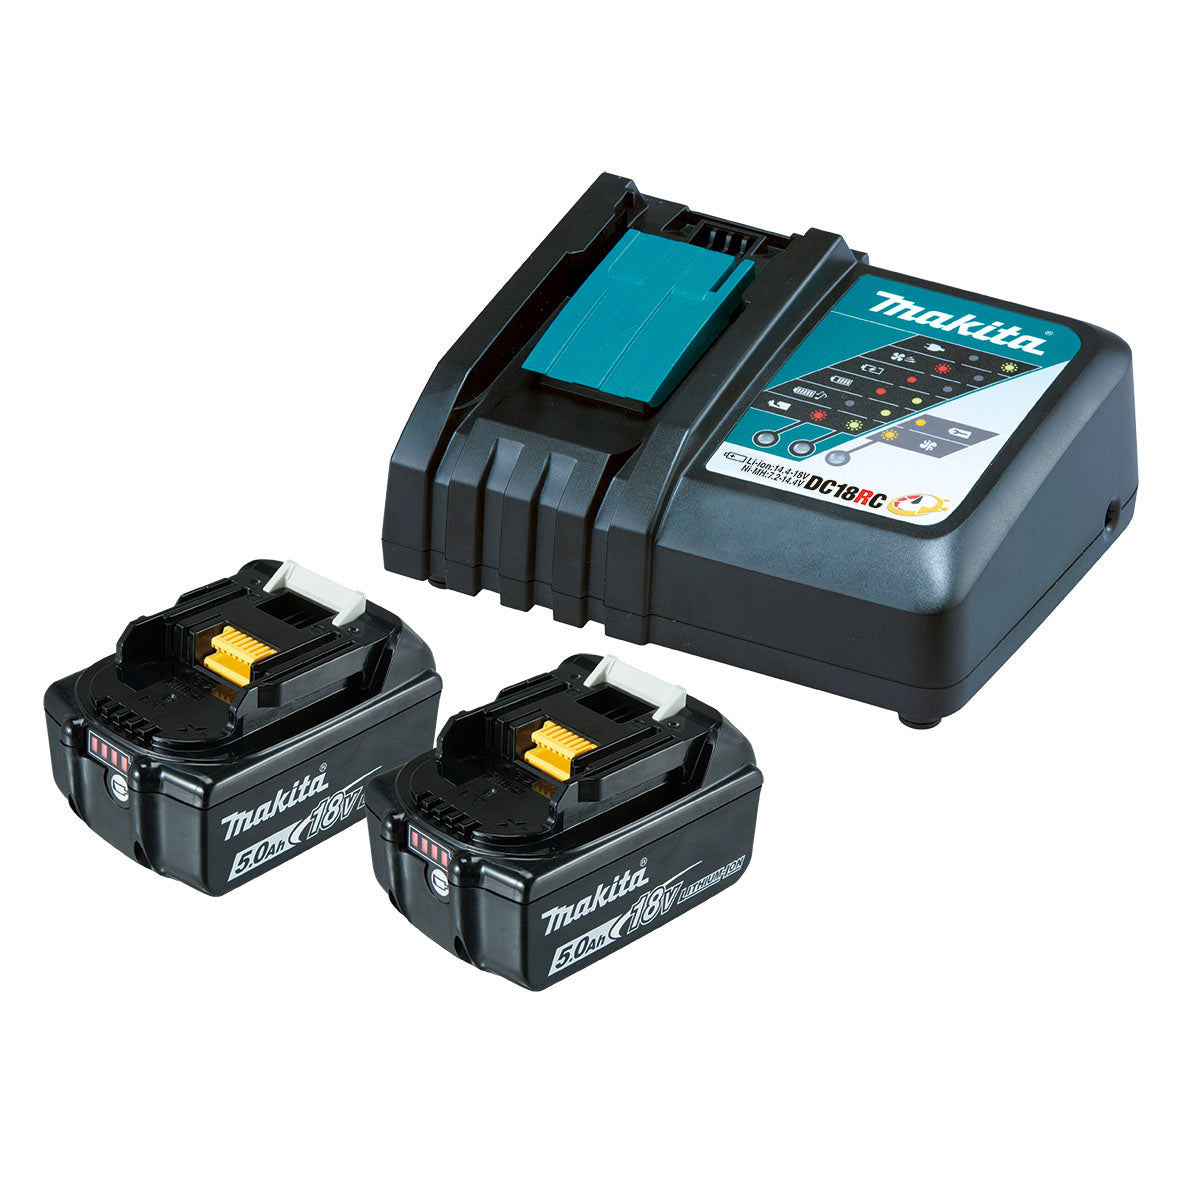 18V Single Port Rapid Battery Charger with 2 x 5.0Ah Batteries 199179-3 by Makita